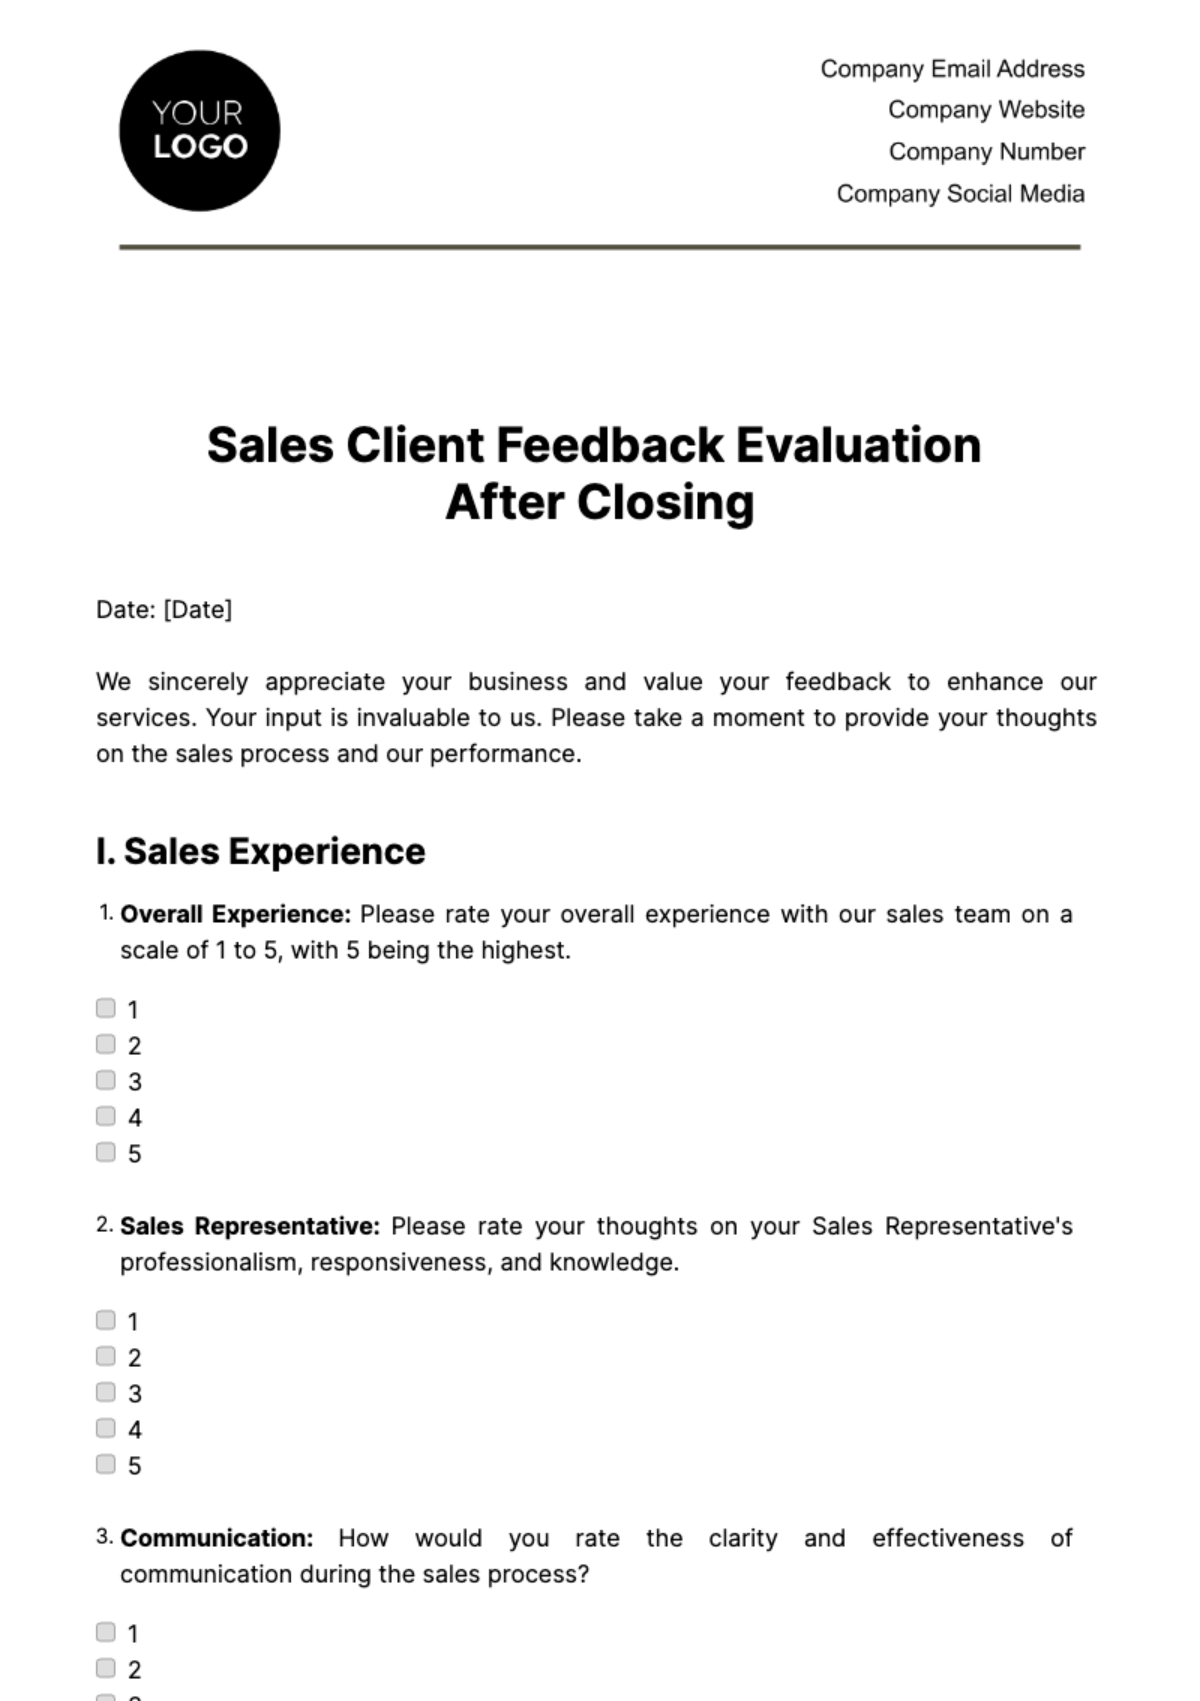 Sales Client Feedback Evaluation after Closing Template